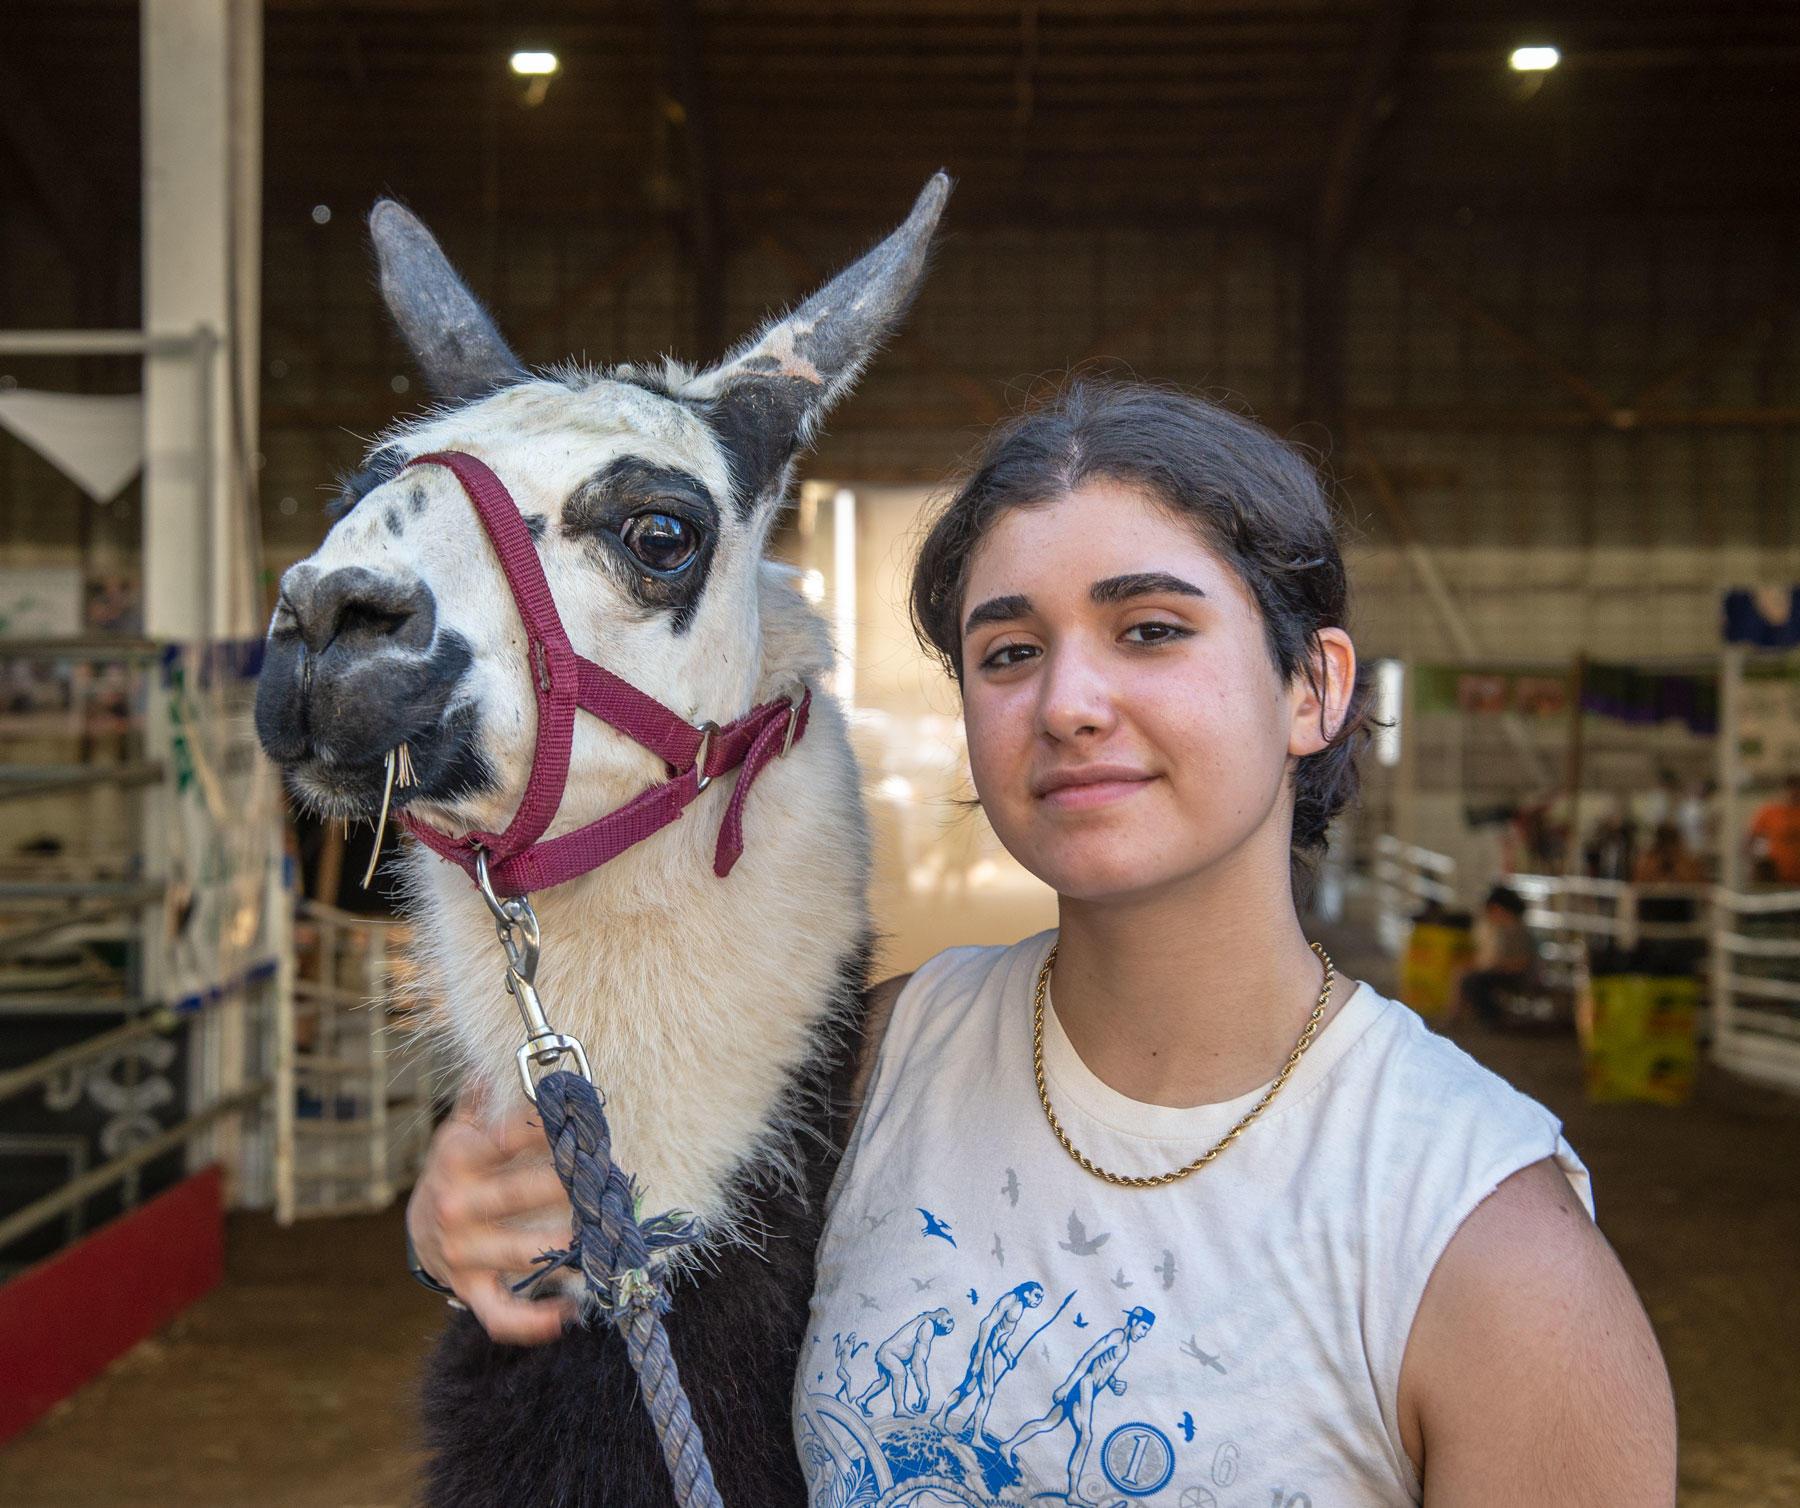 Sid Lefranc showed llamas for several years before capping their 4-H career at the 2022 Clackamas County Fair.